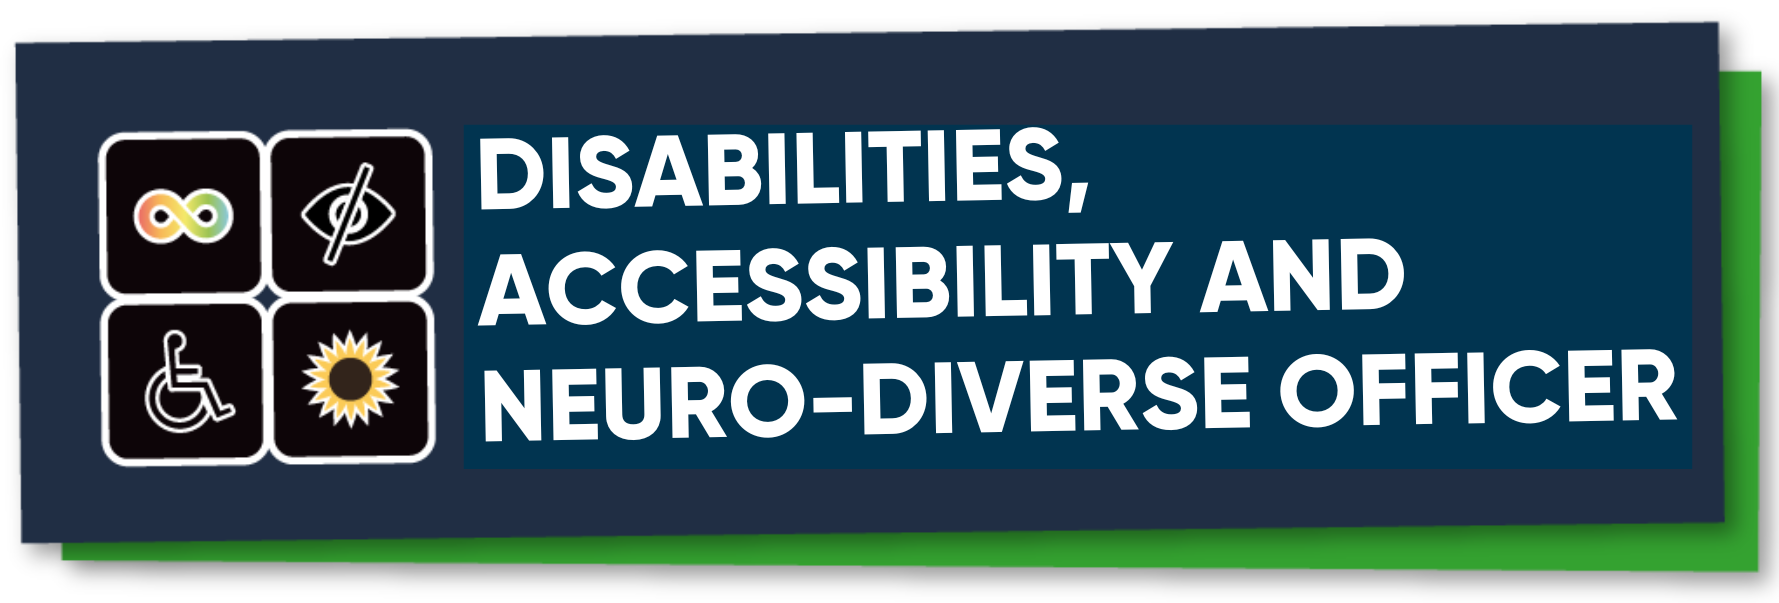 Disabilities, Accessibility and Neuro-Diverse Officer Button